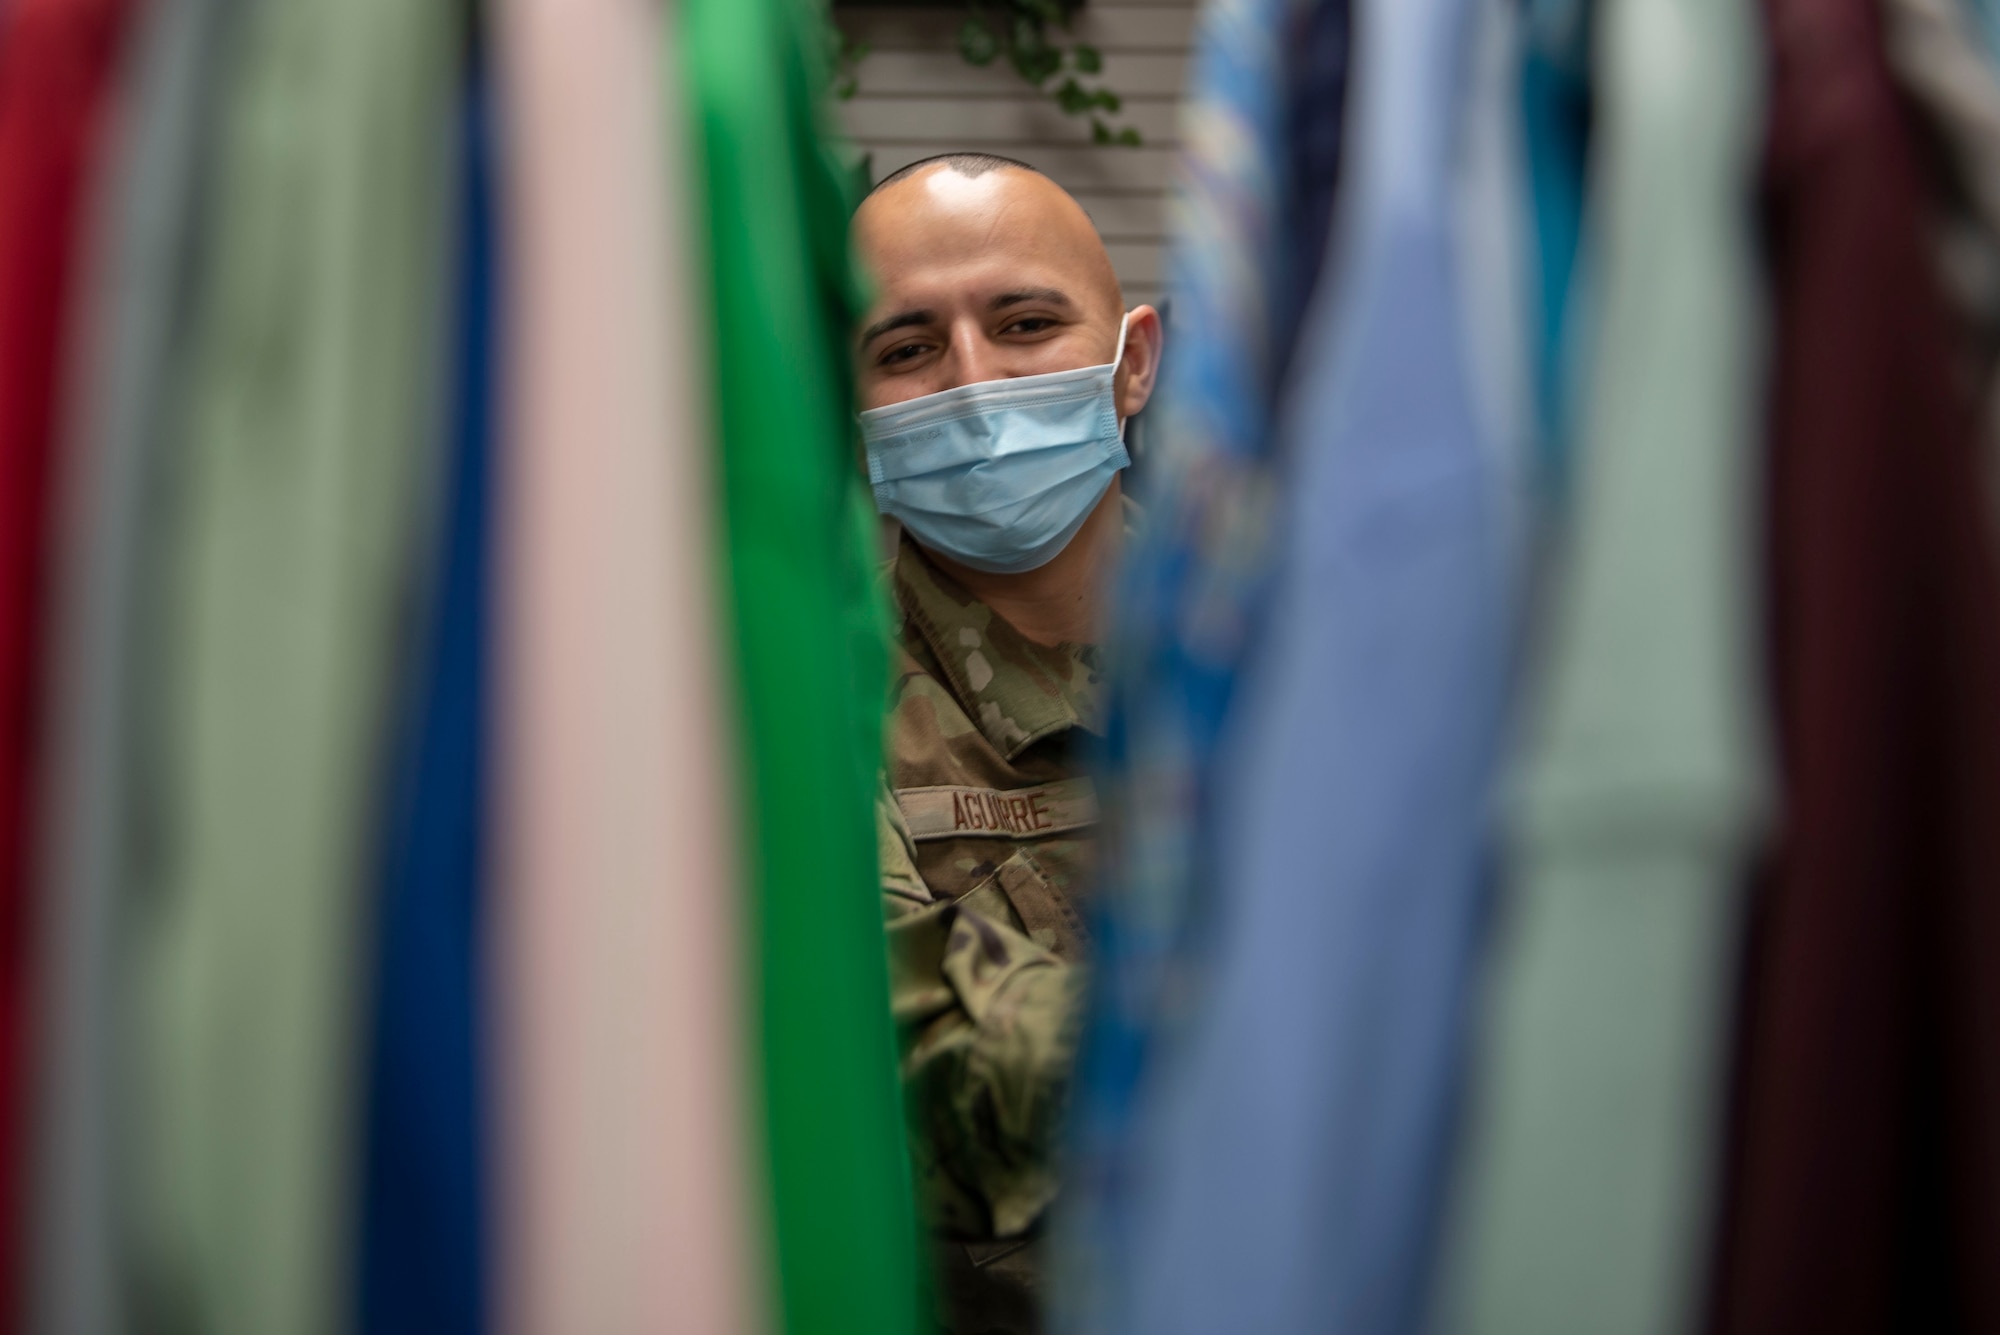 Airman Ray Aguirre, 4th Logistics Readiness Squadron supply technician, shops for clothes at the Airman’s Attic at Seymour Johnson Air Force Base, N.C., Jan. 6, 2022. The Airman’s Attic provides free items such as clothing, household goods, infant supplies, furniture and educational supplies to service members. (U.S Air Force photo by Airman 1st Class Sabrina Fuller)